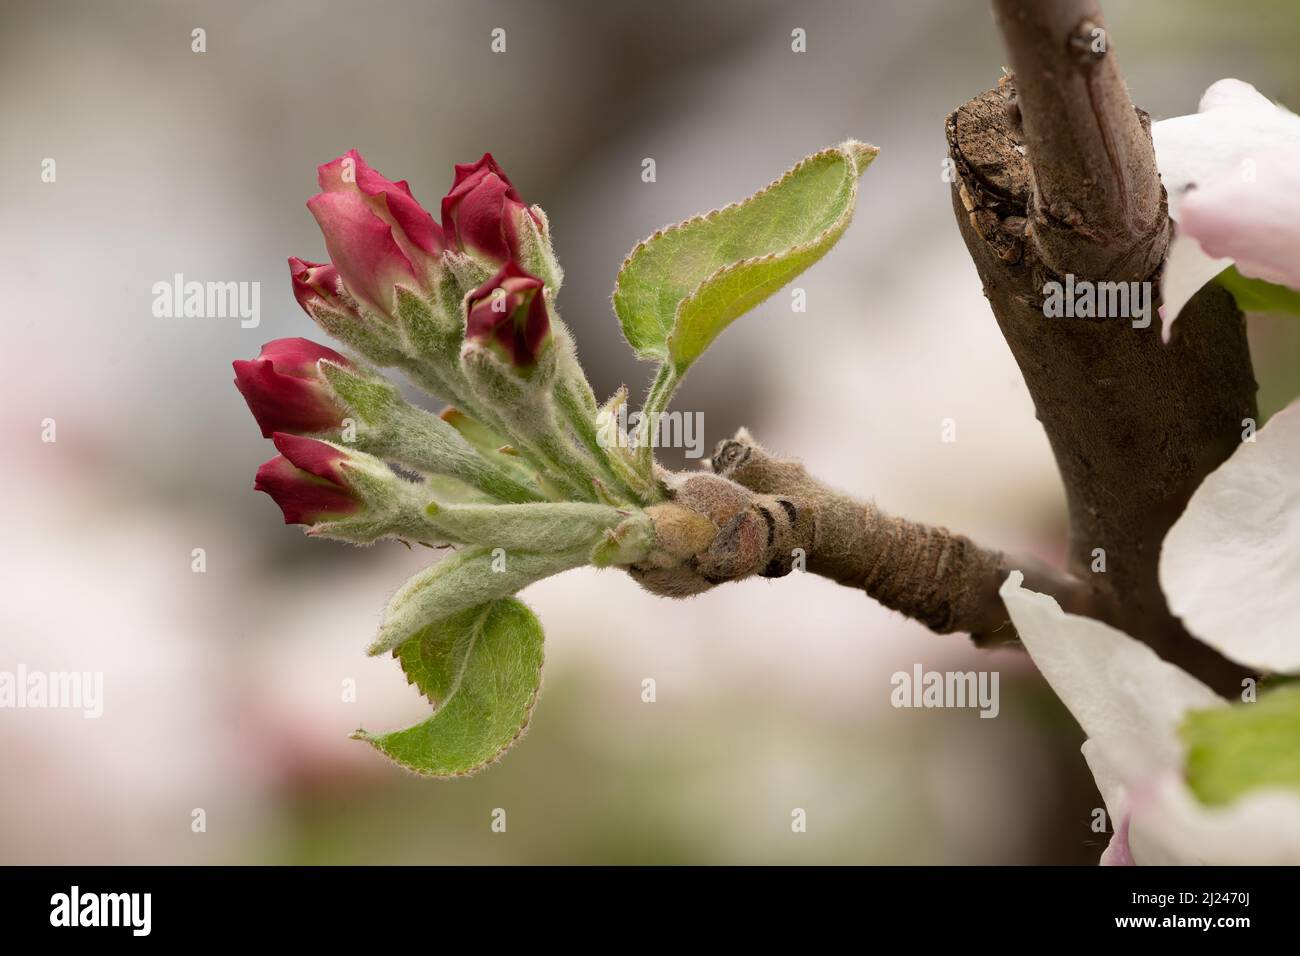 Macro photograph of flower buds about to open on Granny Smith apple tree, sharp focus Stock Photo